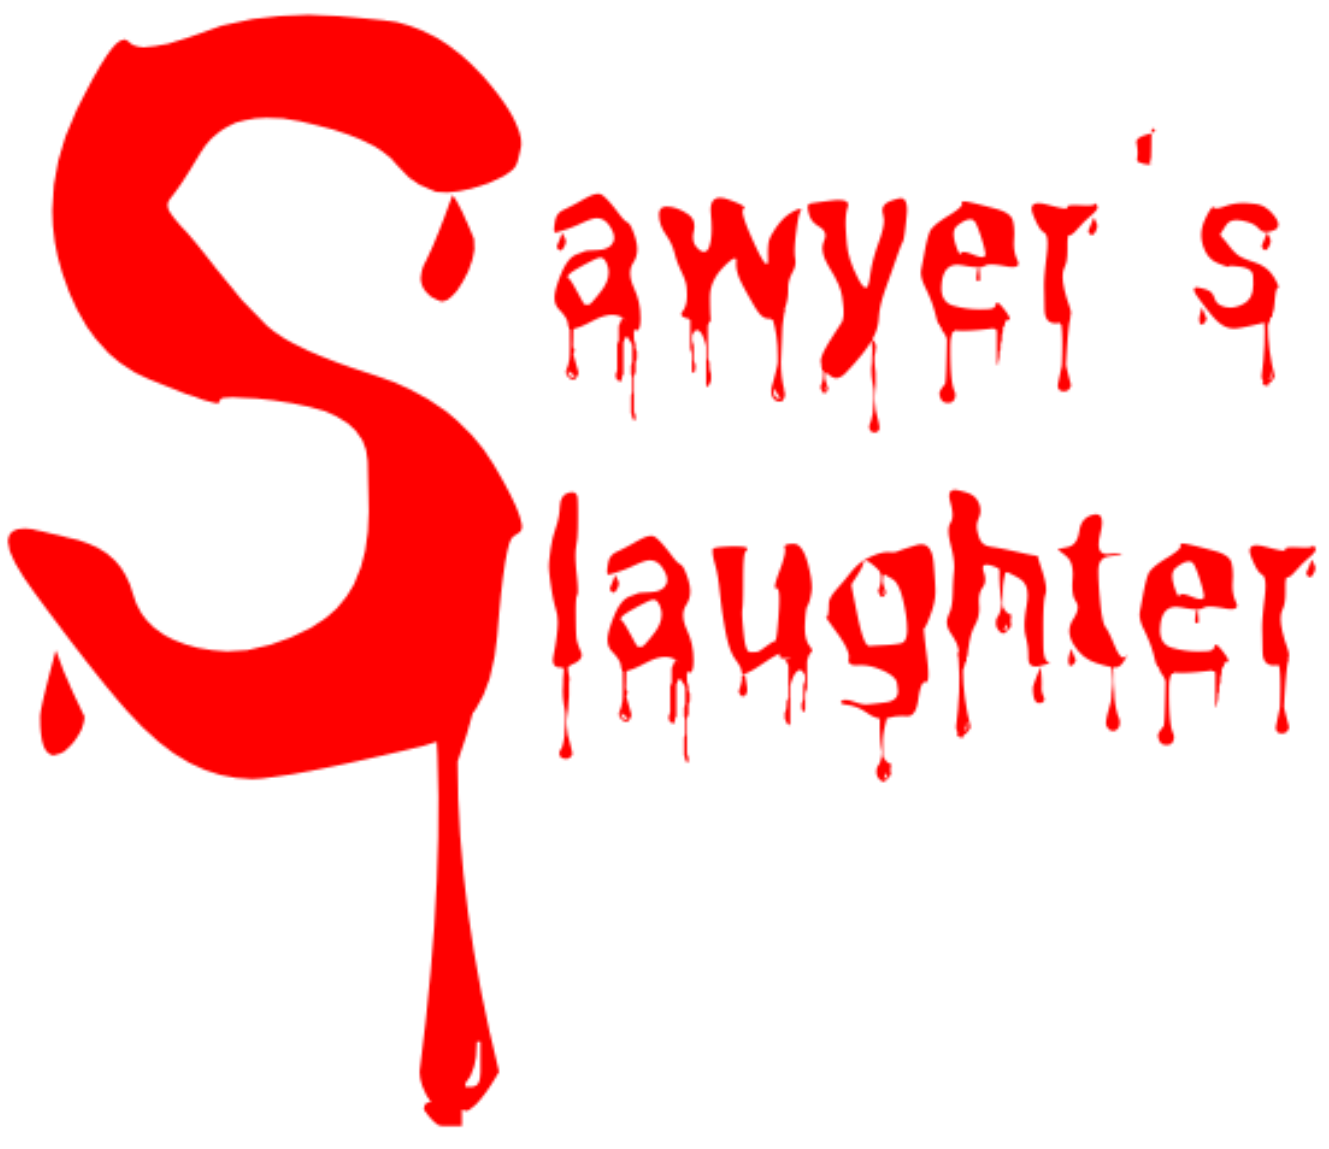 Sawyer's Slaughter Coming Soon!